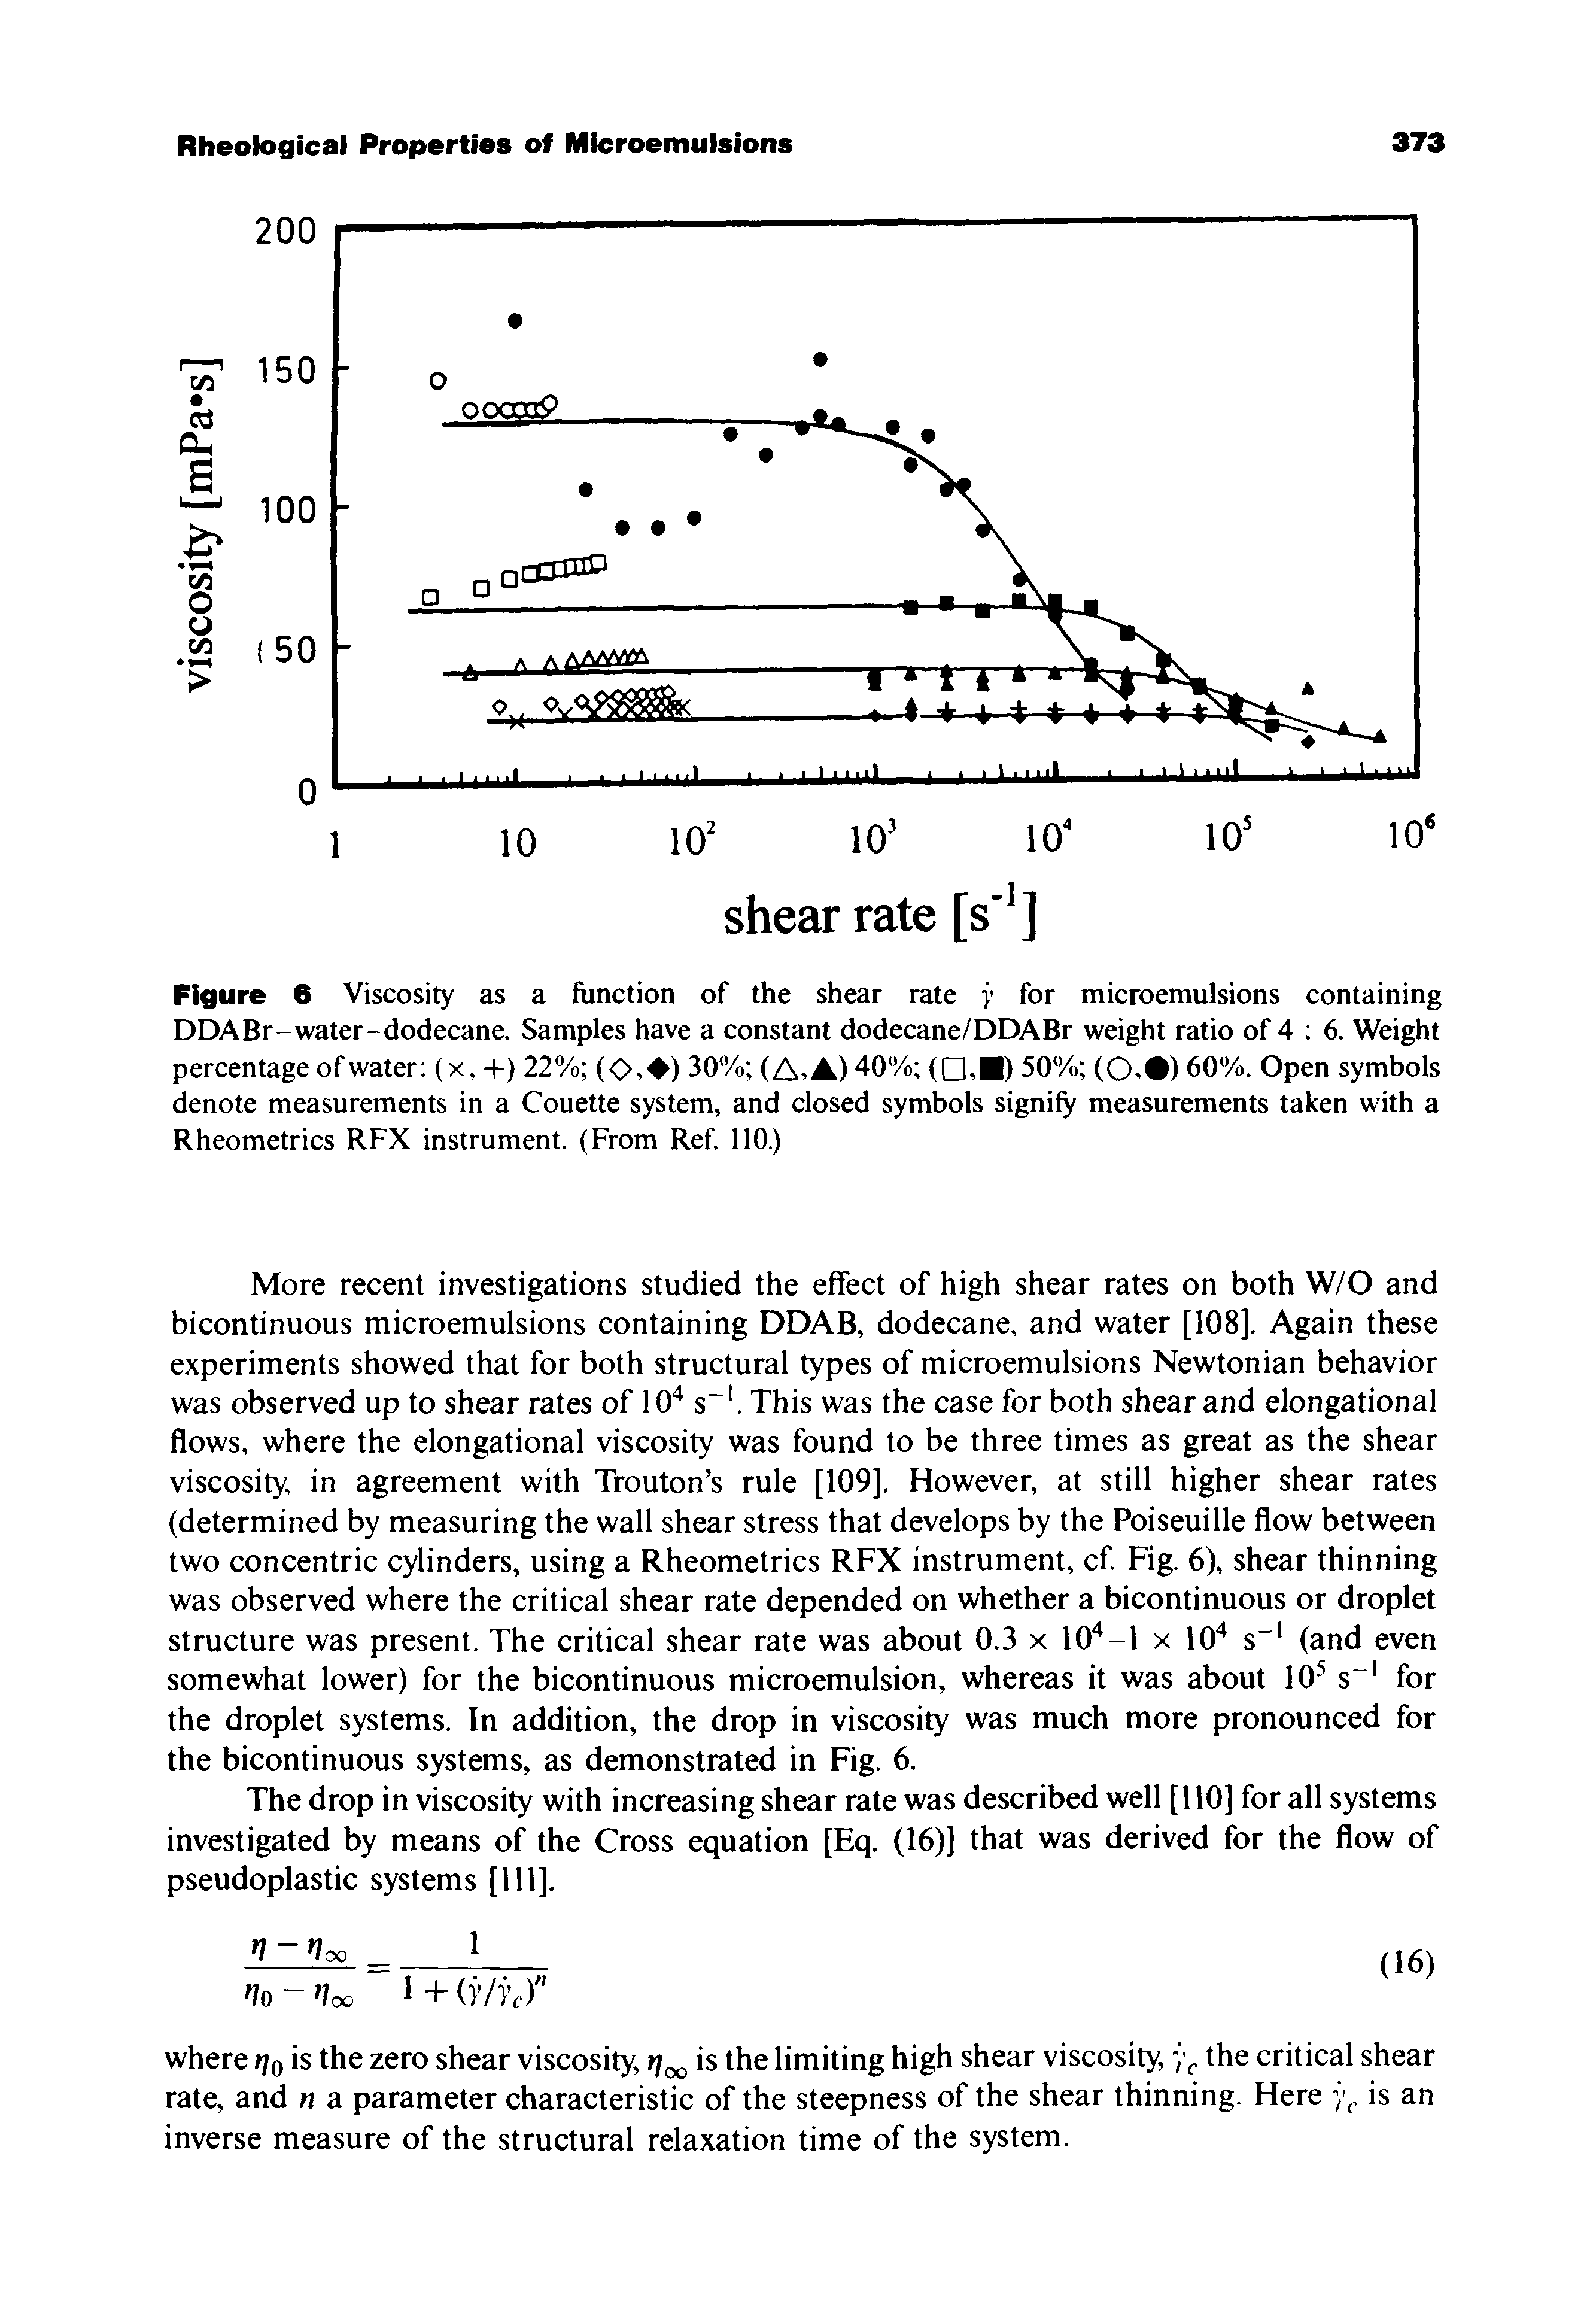 Figure 6 Viscosity as a function of the shear rate y for microemulsions containing DDABr-water-dodecane. Samples have a constant dodecane/DDABr weight ratio of 4 6. Weight percentage of water (x, +) 22% (O, ) 30% (A, A) 40% ( , ) 50% (O. ) 60%, Open symbols denote measurements in a Couette system, and closed symbols signify measurements taken with a Rheometrics RFX instrument. (From Ref. 110.)...